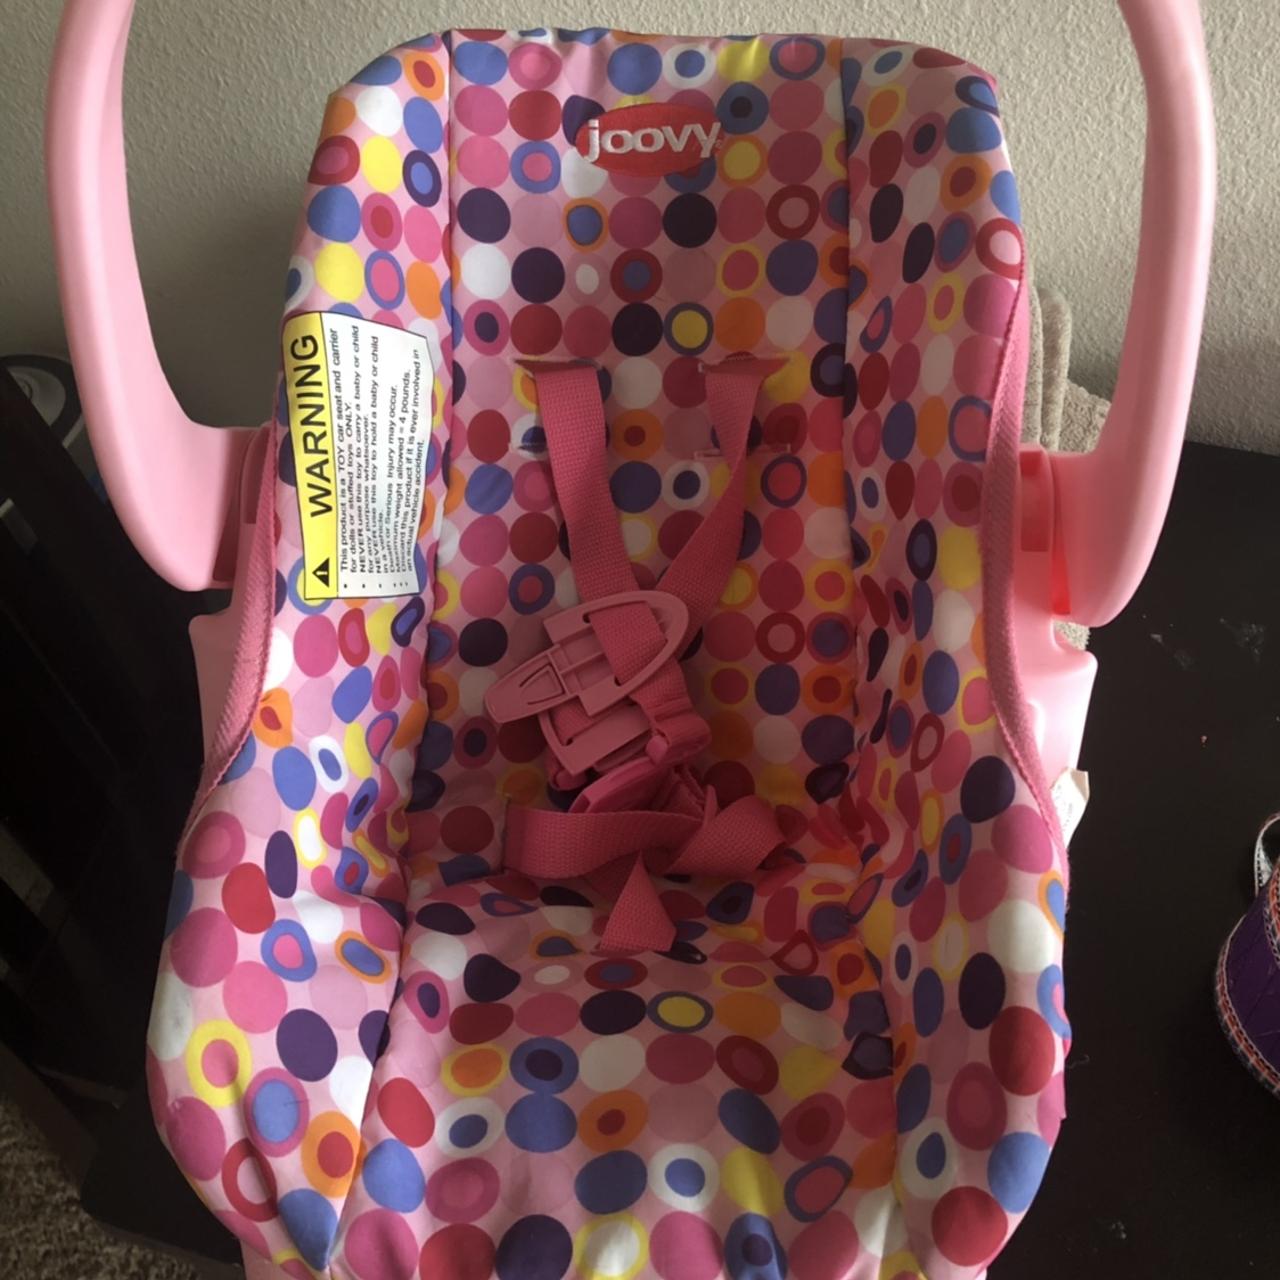  Joovy Toy Car Seat Baby Doll Carrier Featuring Crash